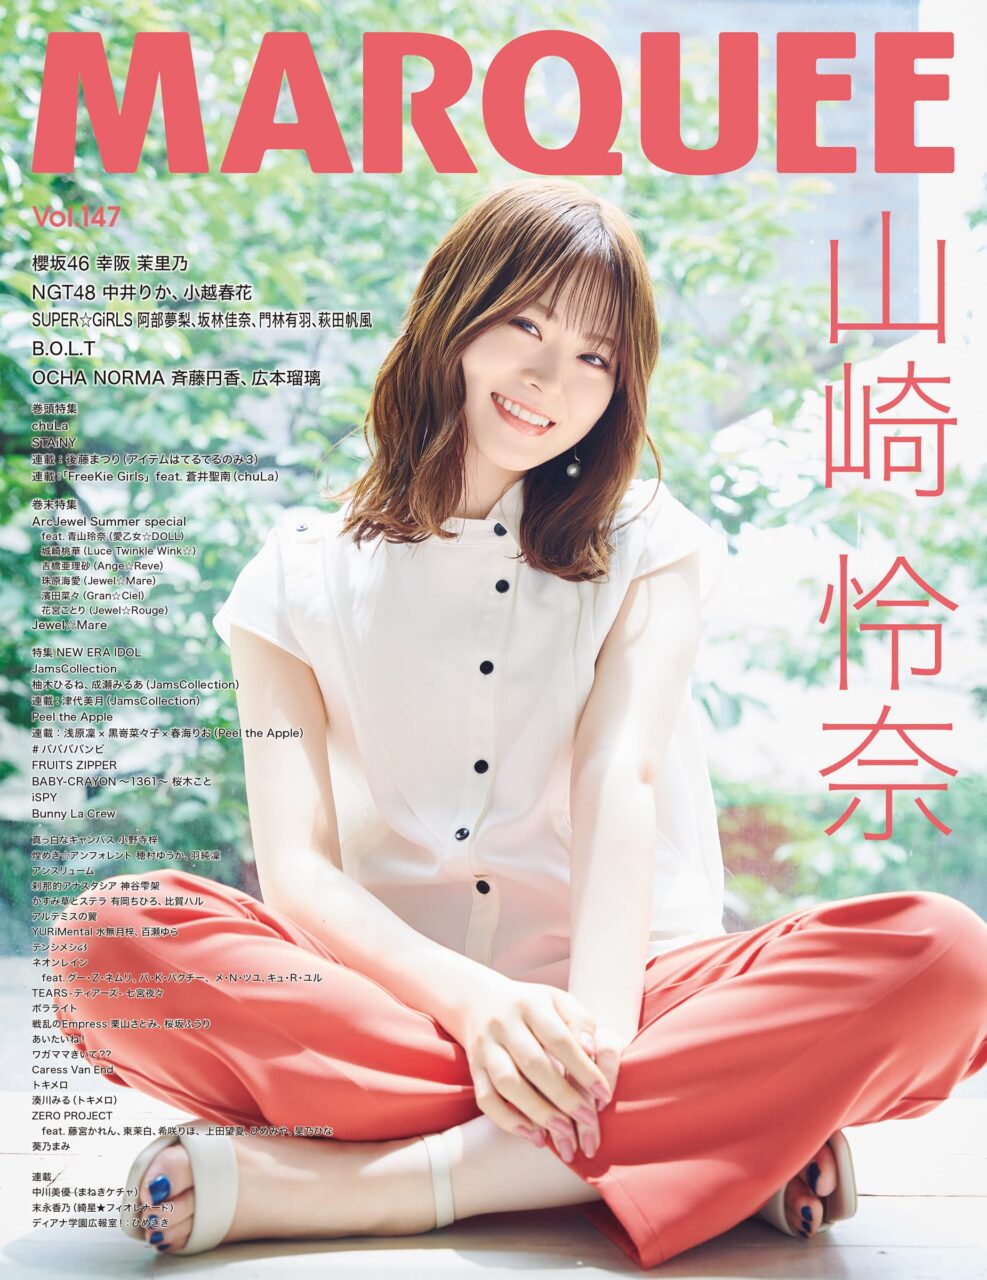 NGT48 中井りか・小越春花が登場！「MARQUEE Vol.147」8/22発売！